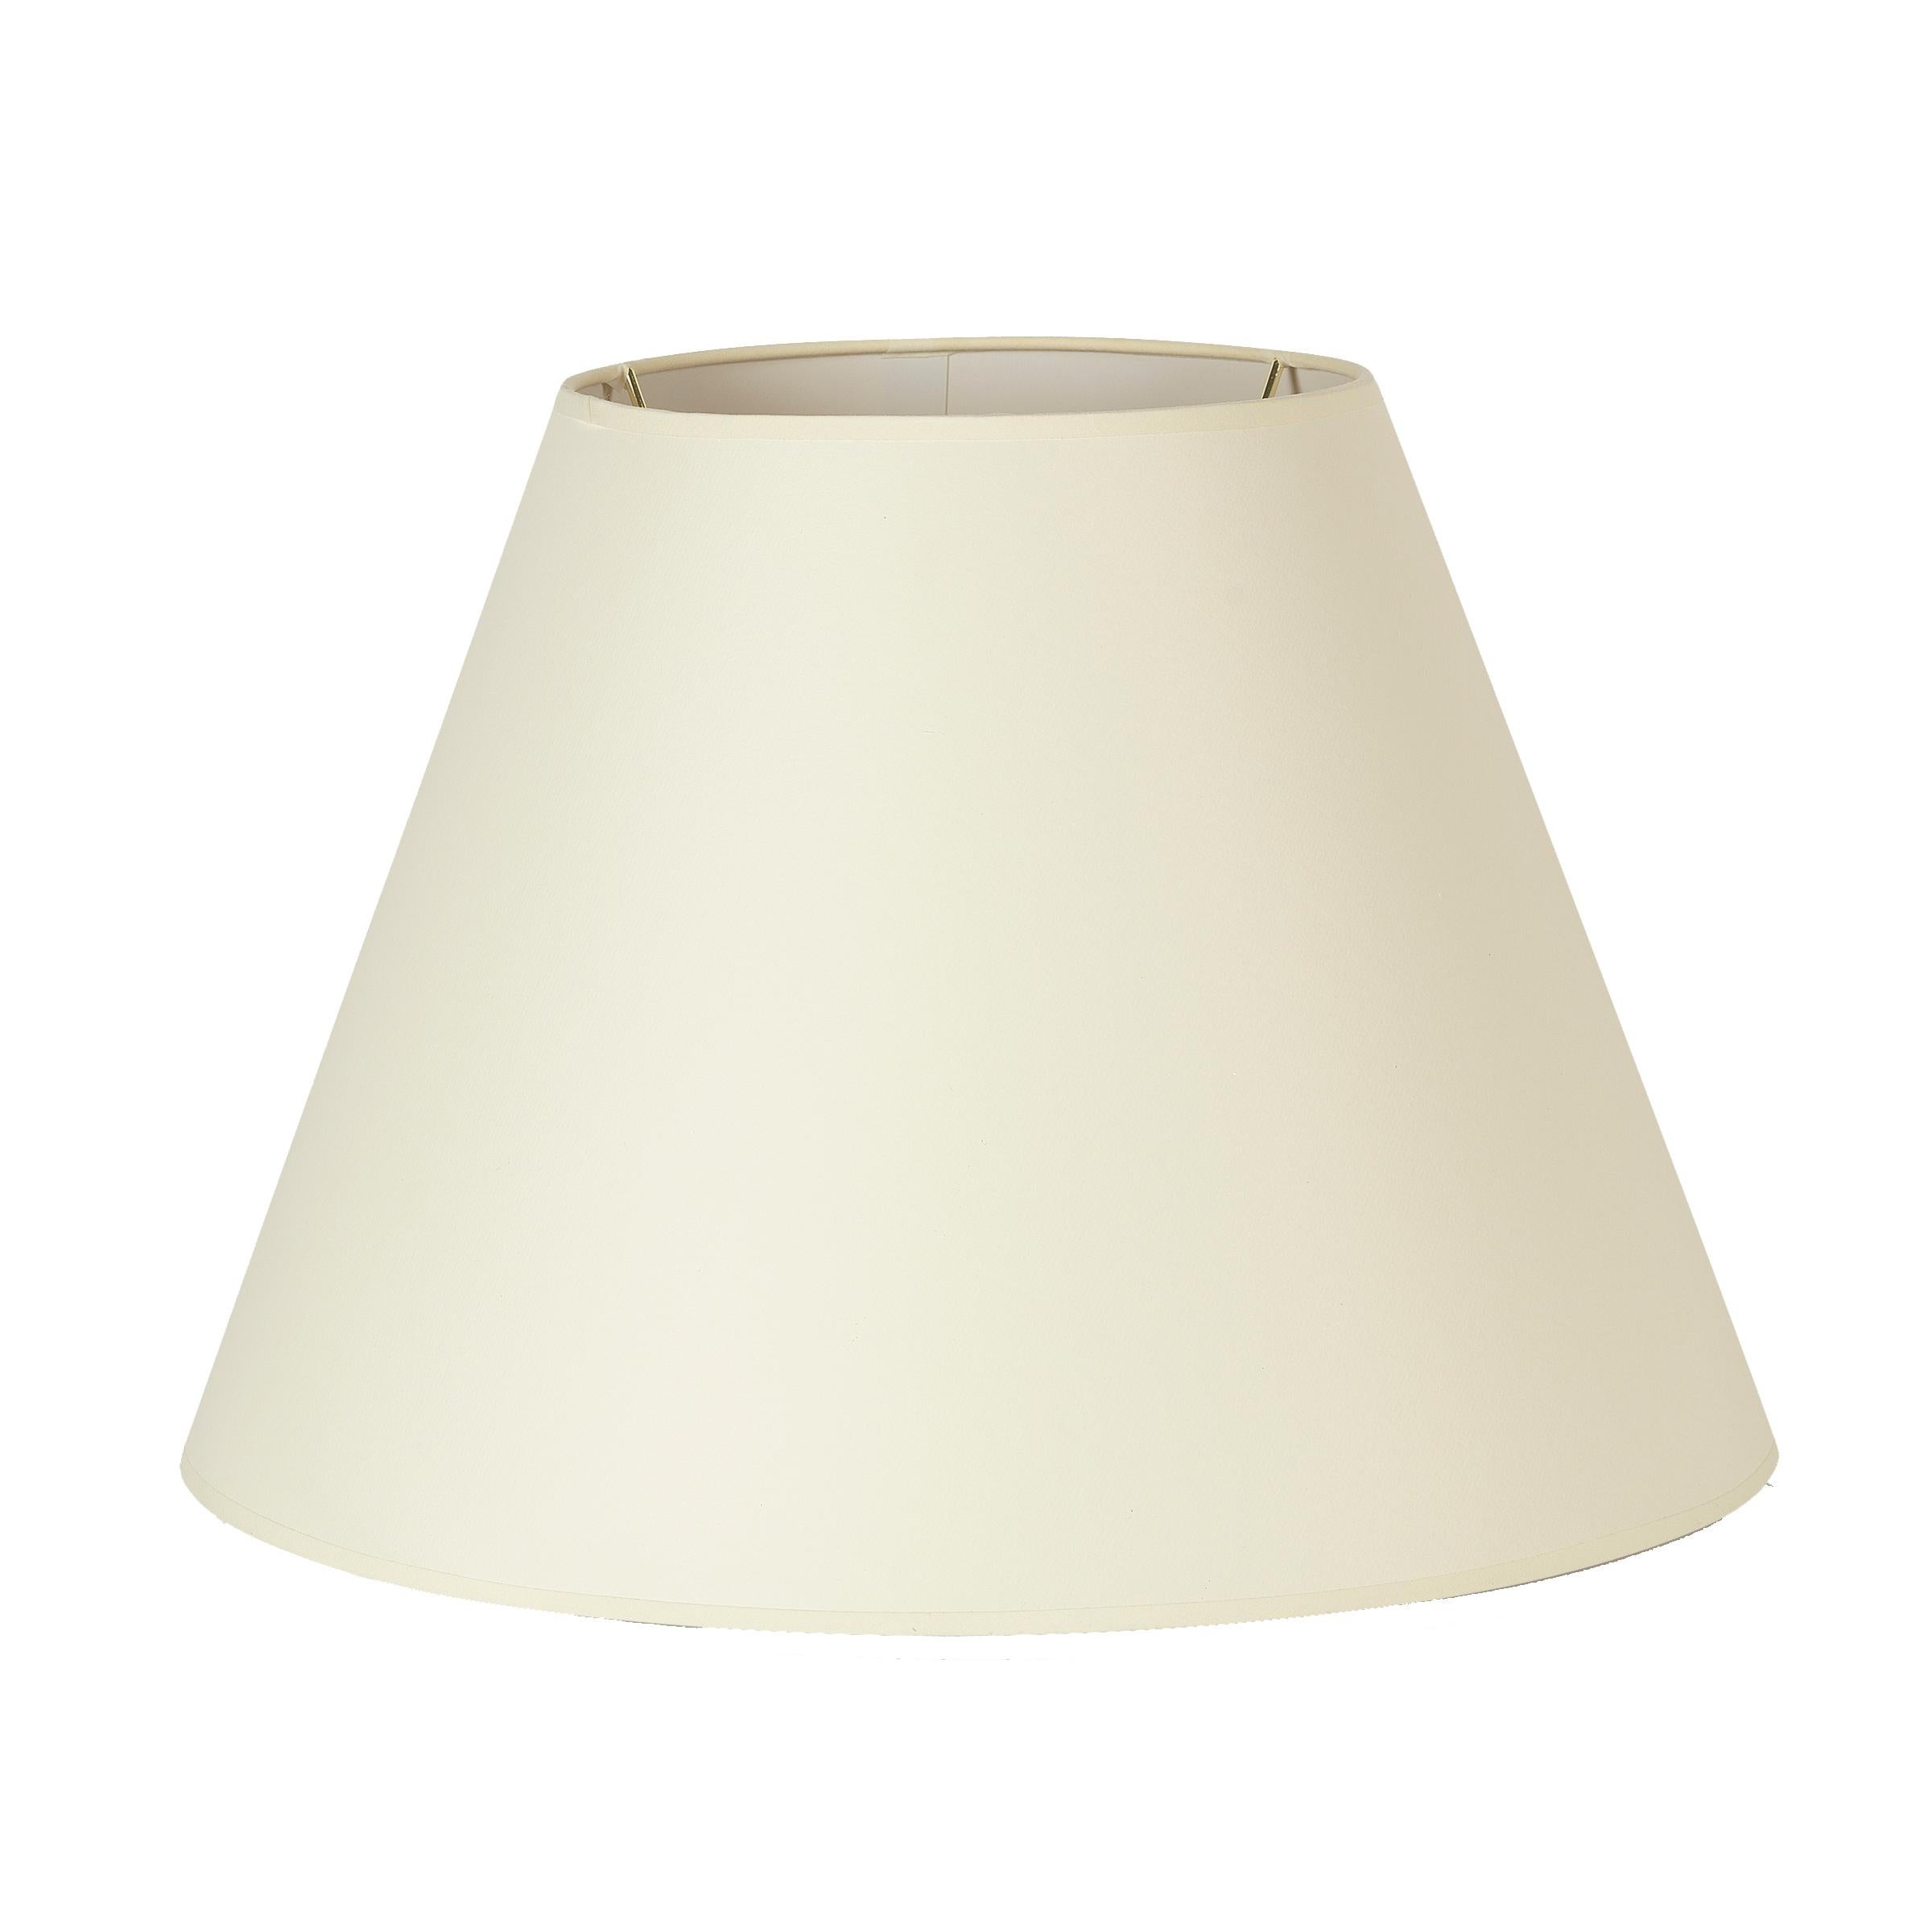 A classic off-white paper shade that enhances and adds to whichever lamp it tops. Available in three sizes and designed to fit each of the Bunny Williams Home lamps. Measure: 18